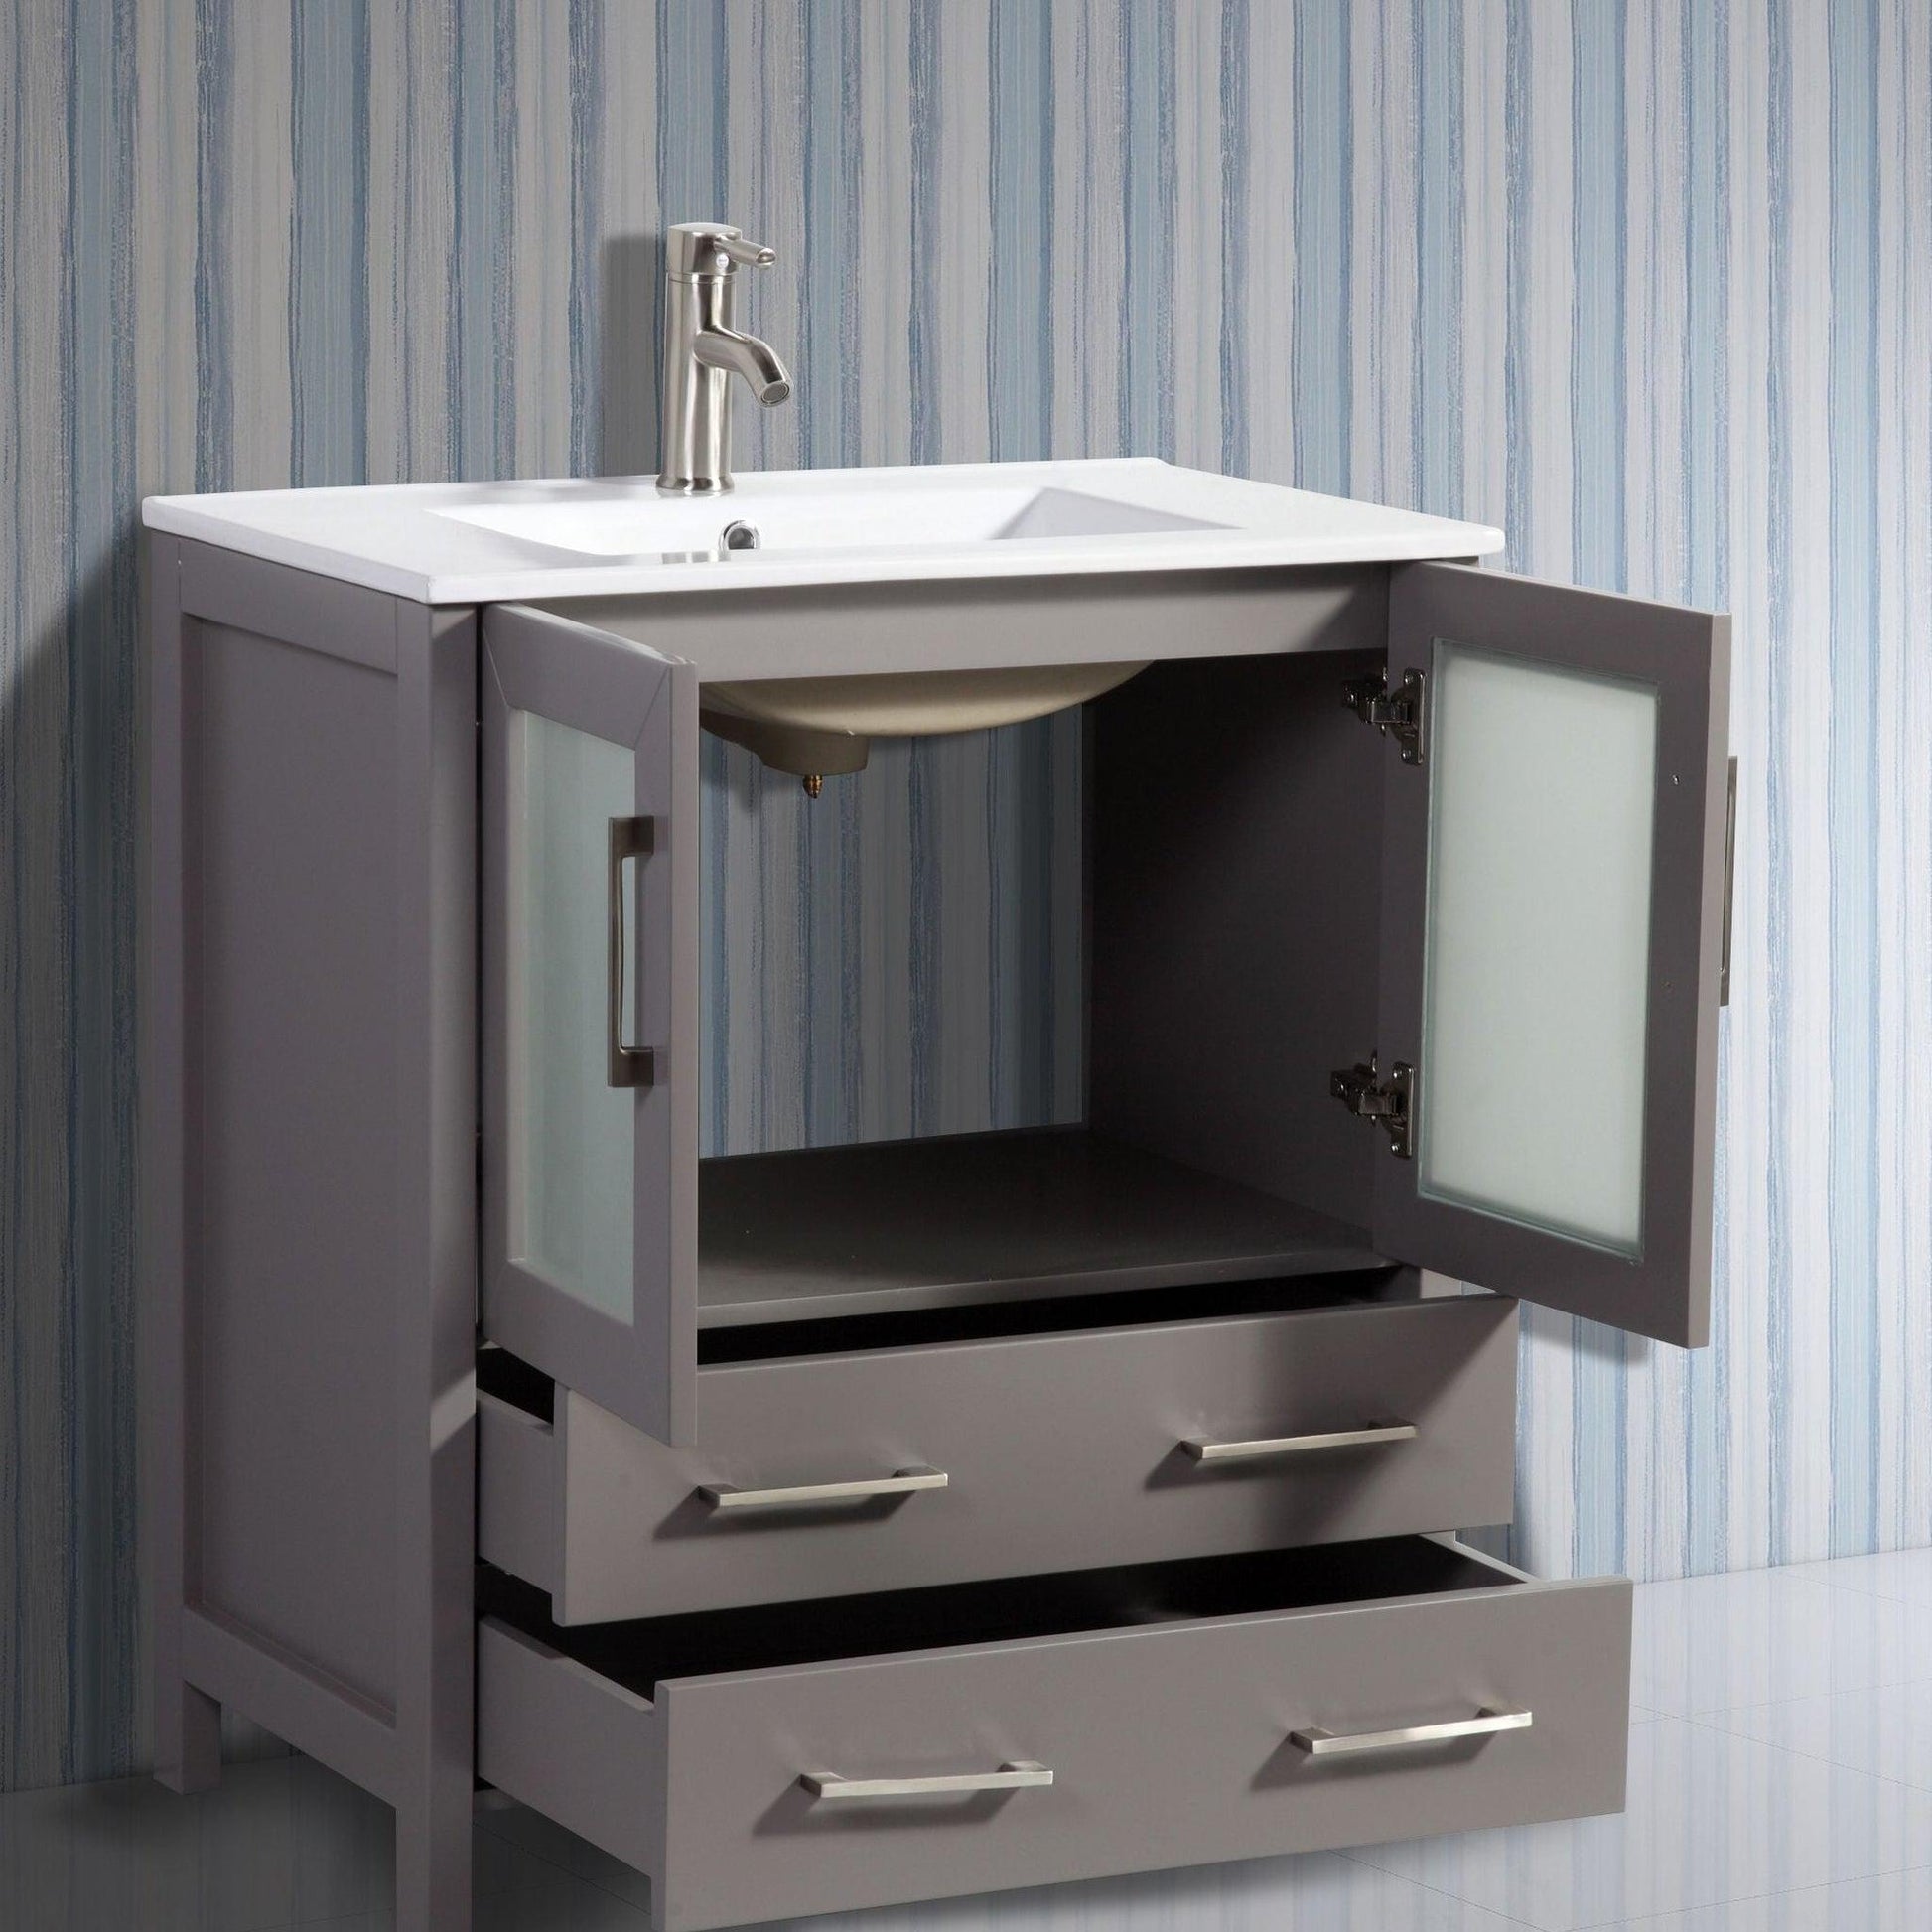 30 Bathroom Vanity With Ceramic Basin Sink, Drawer And 2-tier